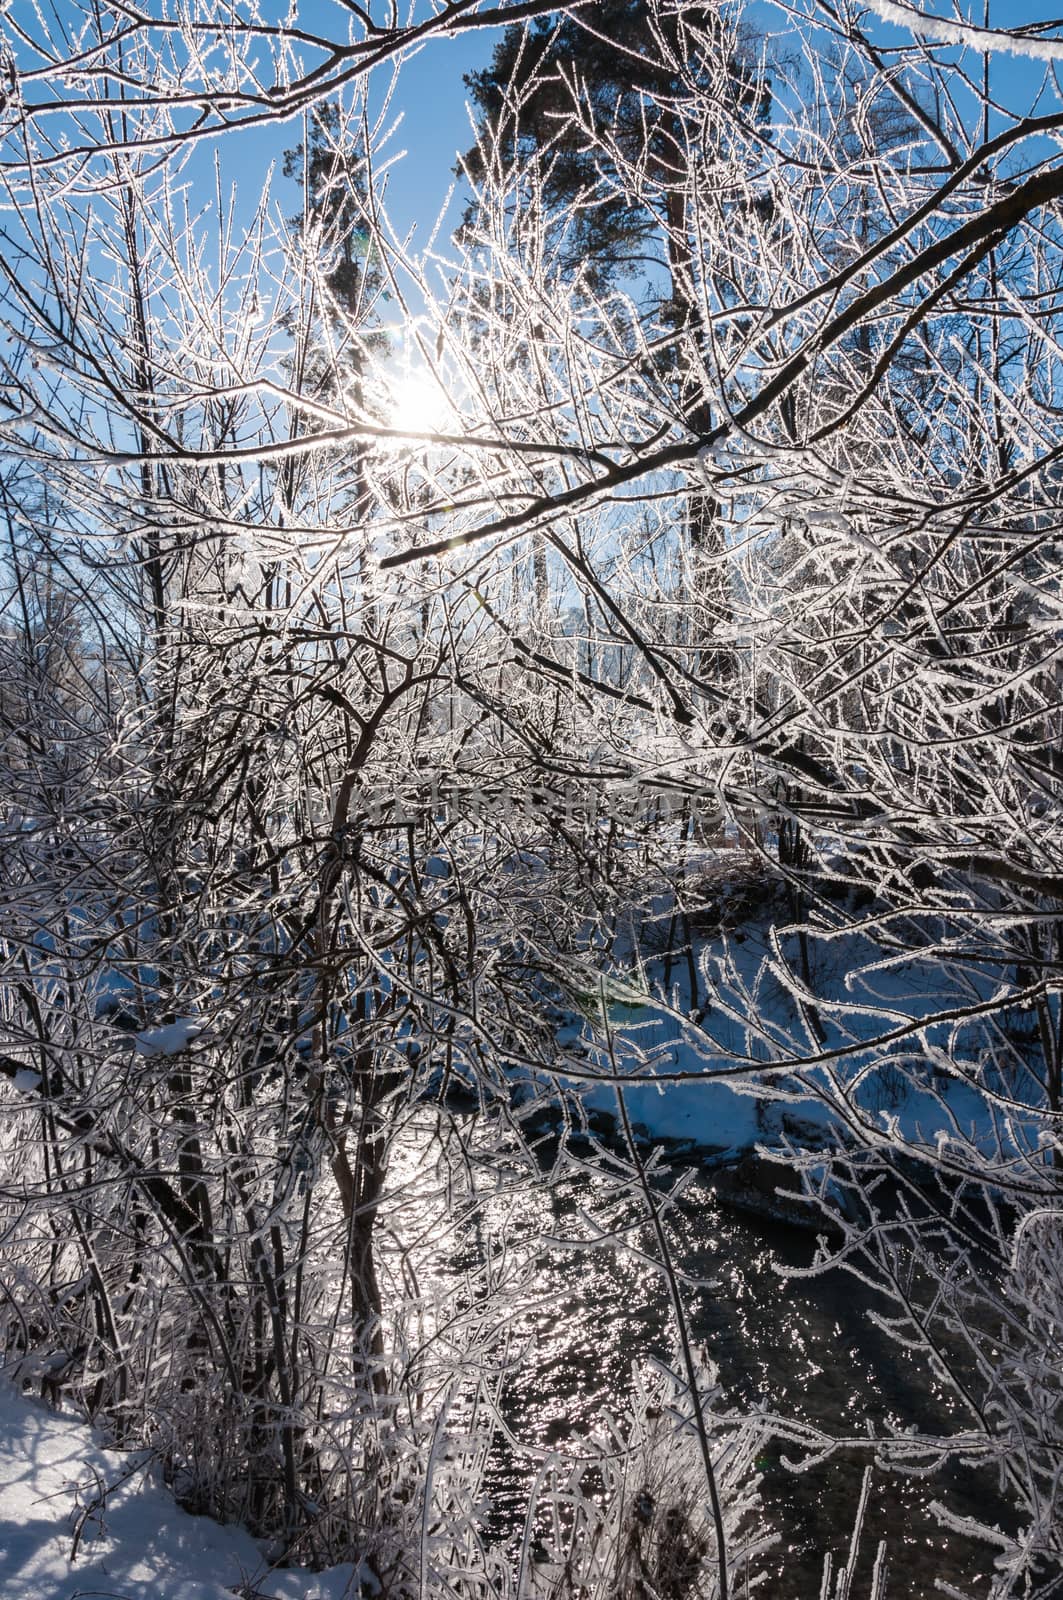 sun filters through the snow-covered branches